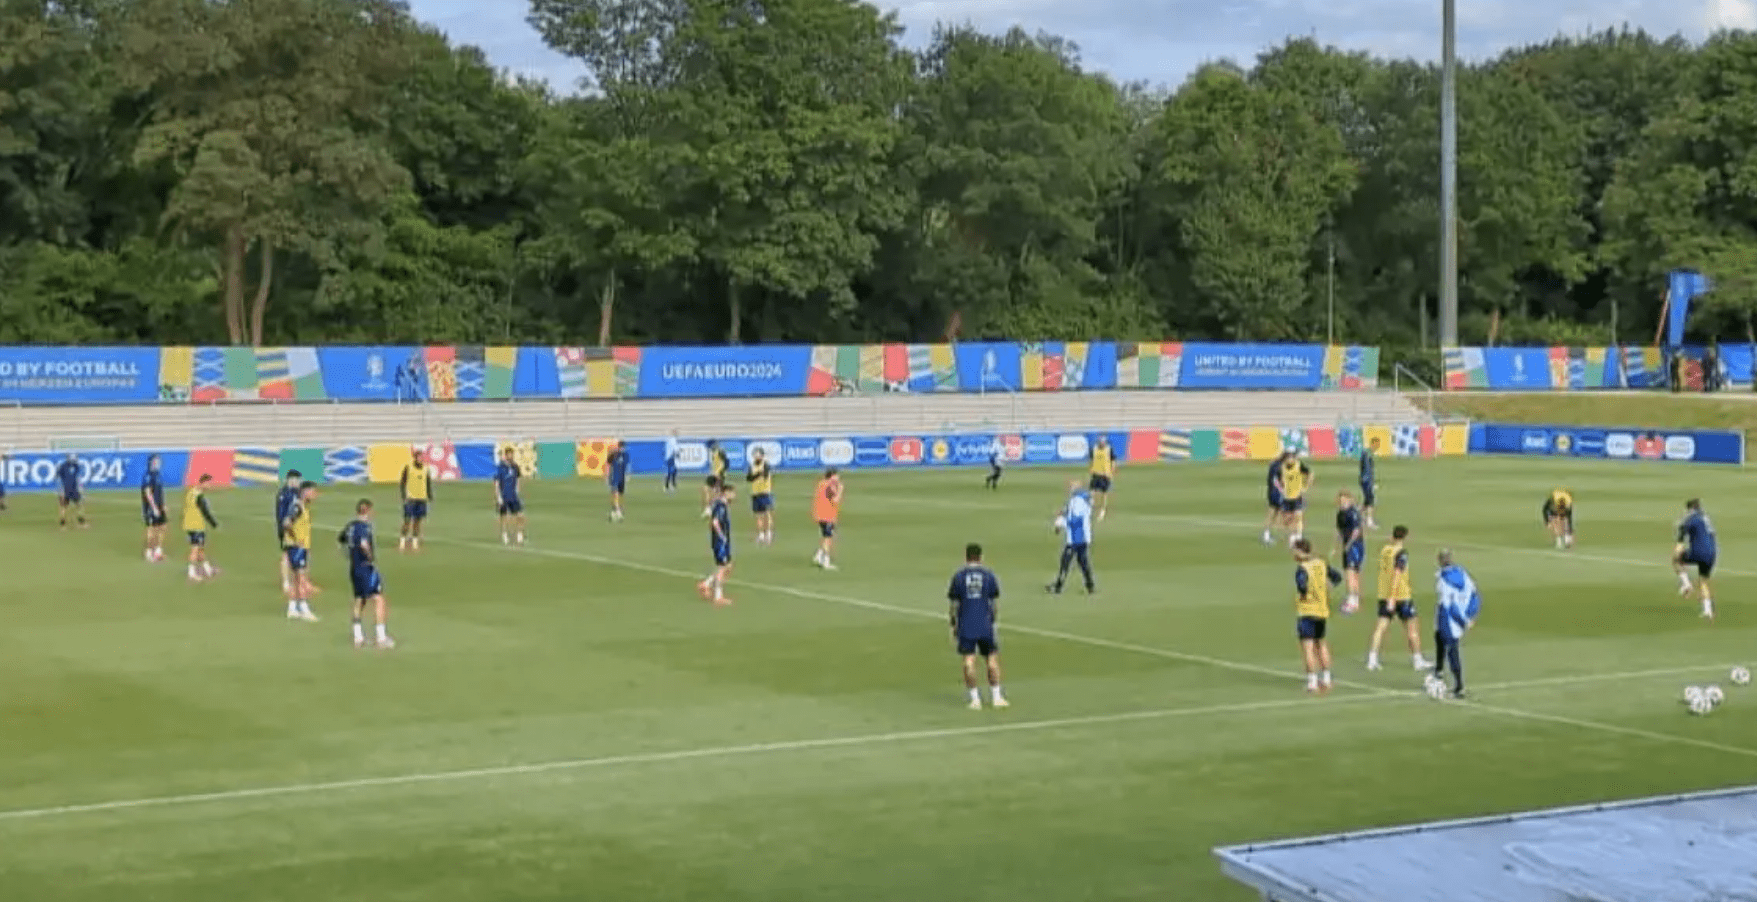 Focus on Italy's Pre-Match Training: Donnarumma Trains Hard for Spain, Inter Duo Key to Counterattack